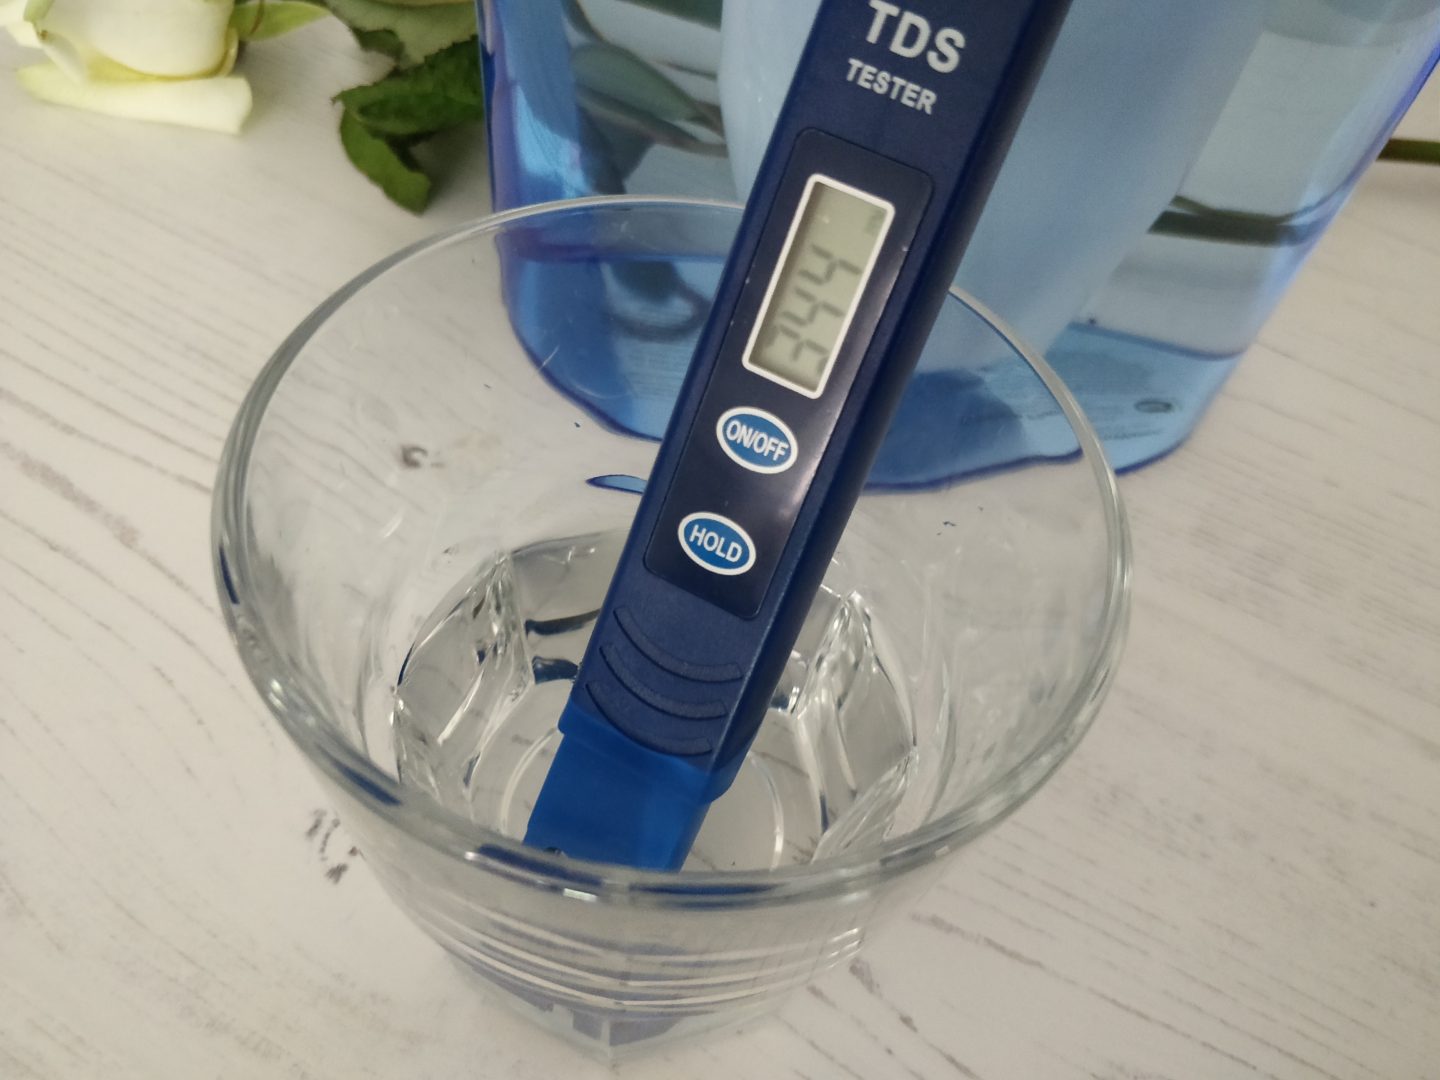 ZeroWater Filter TDS quality meter measure before filtering